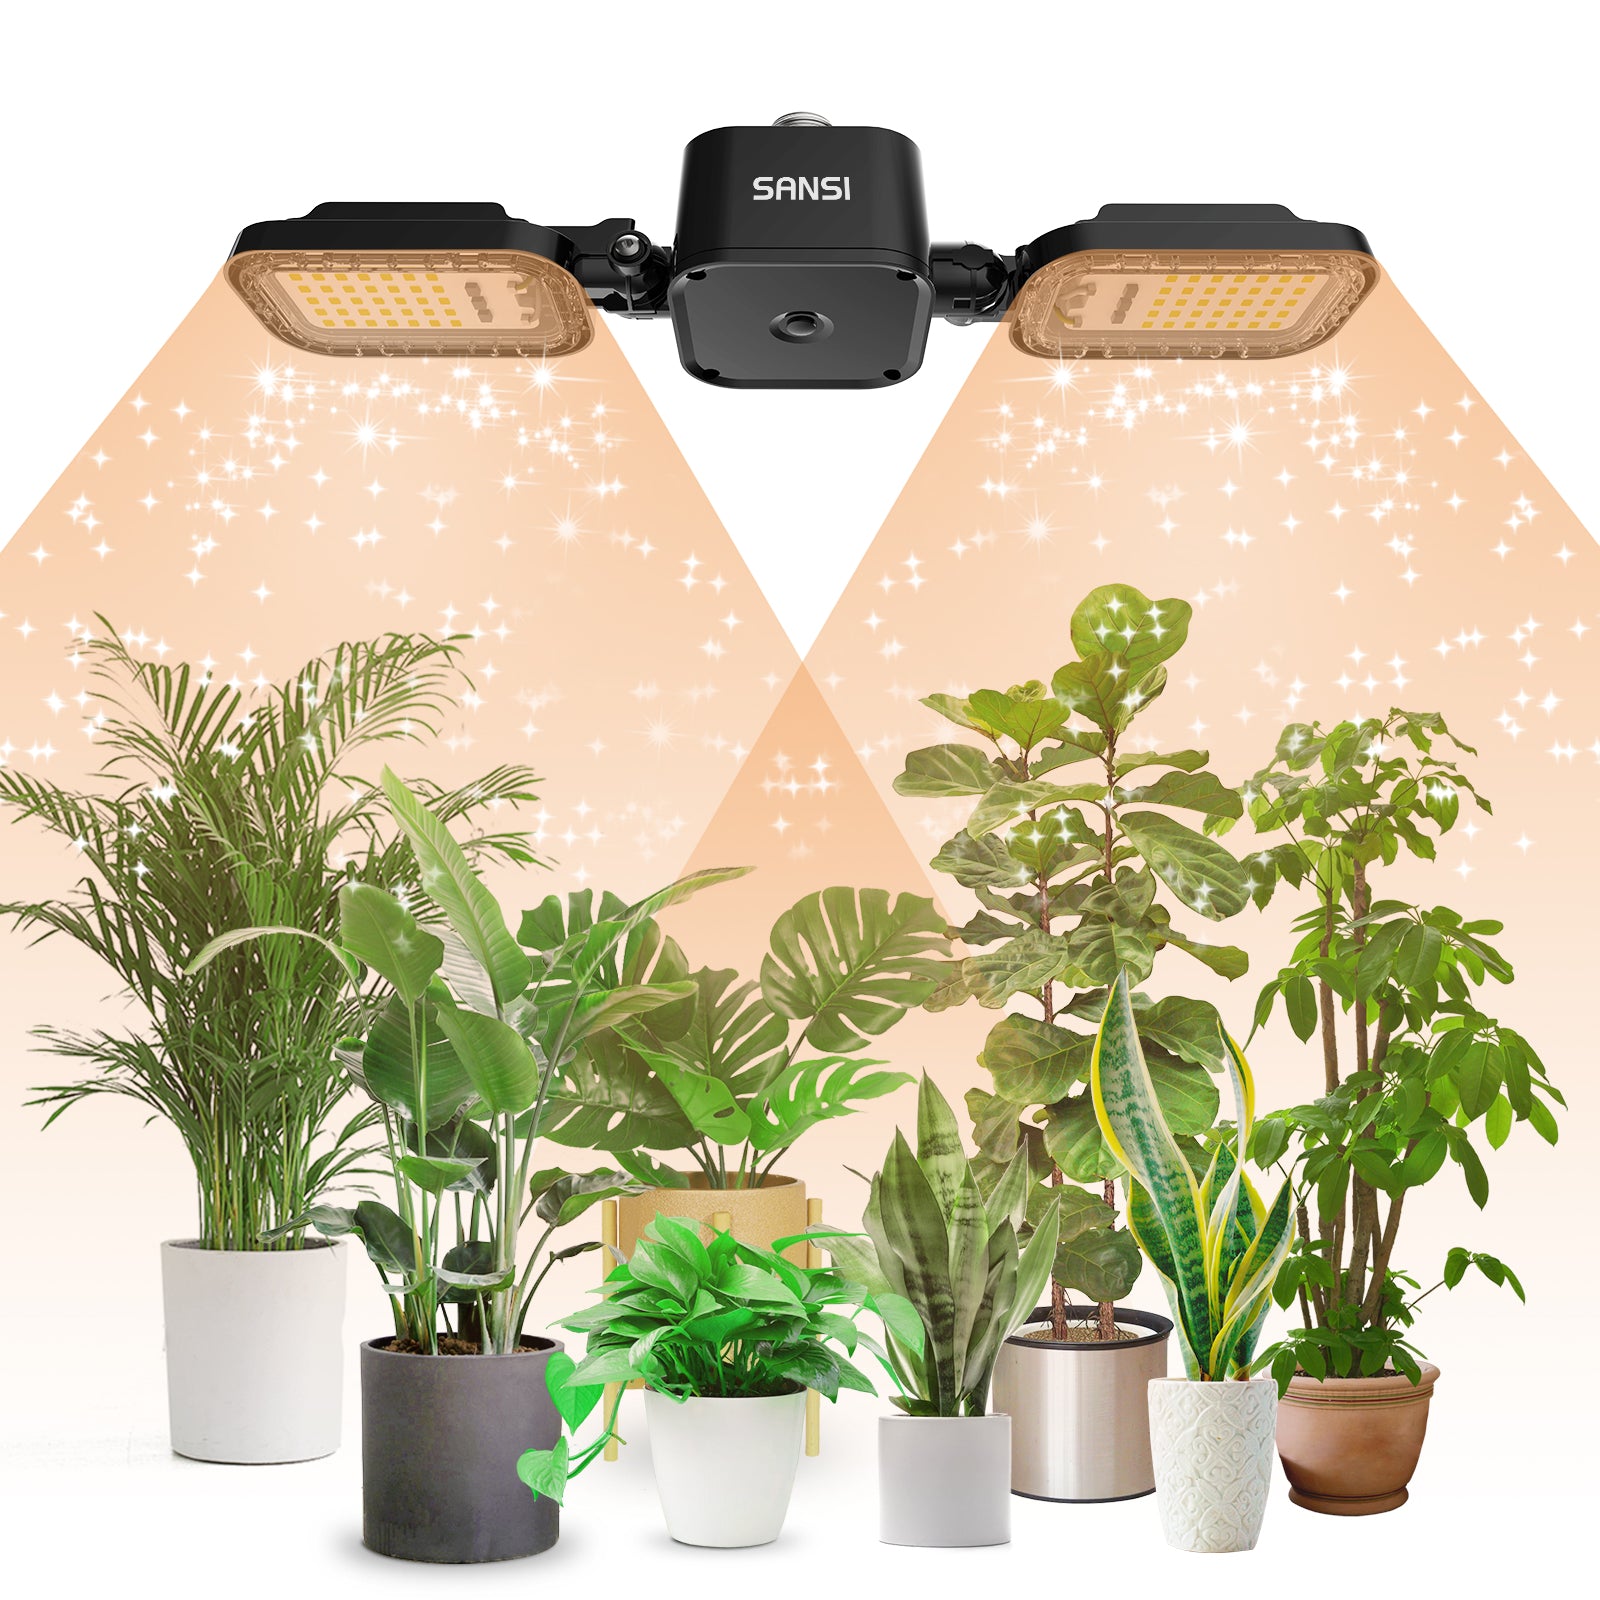 60W Panel Led Grow Light with folding wings for indoorplanting